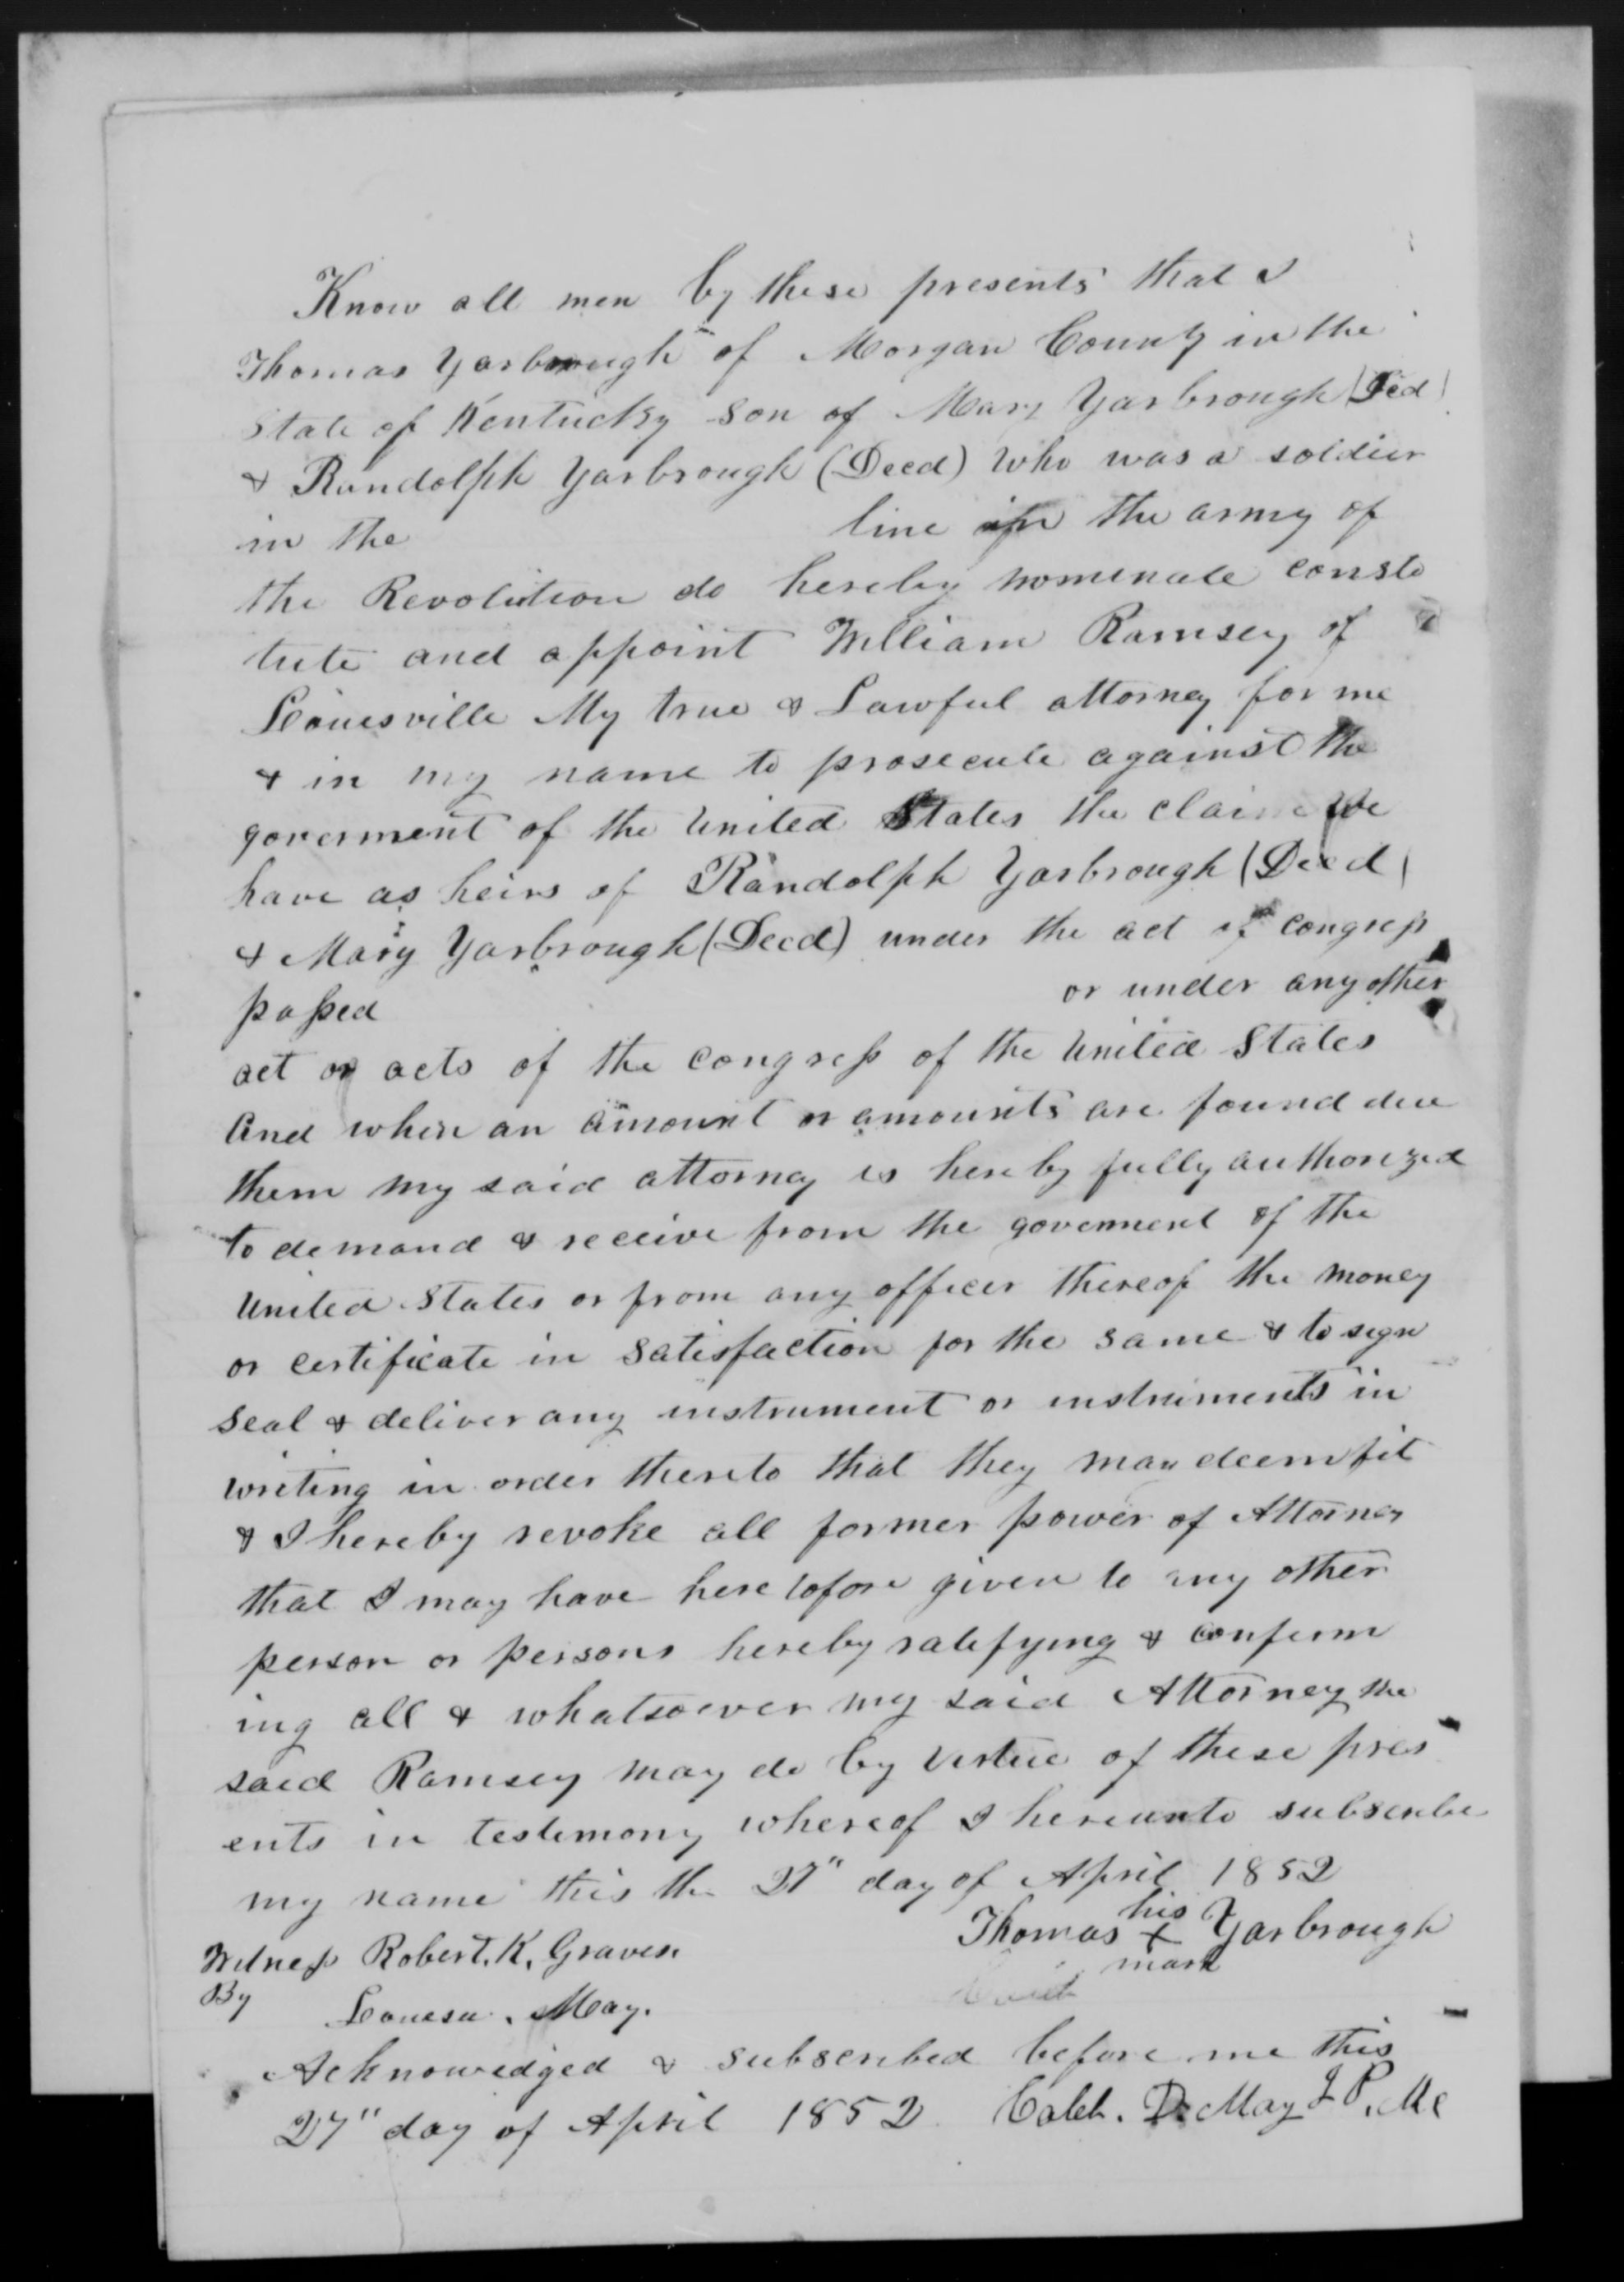 Appointment of William Ramsey as Thomas Yarborough's Power of Attorney, 27 April 1852